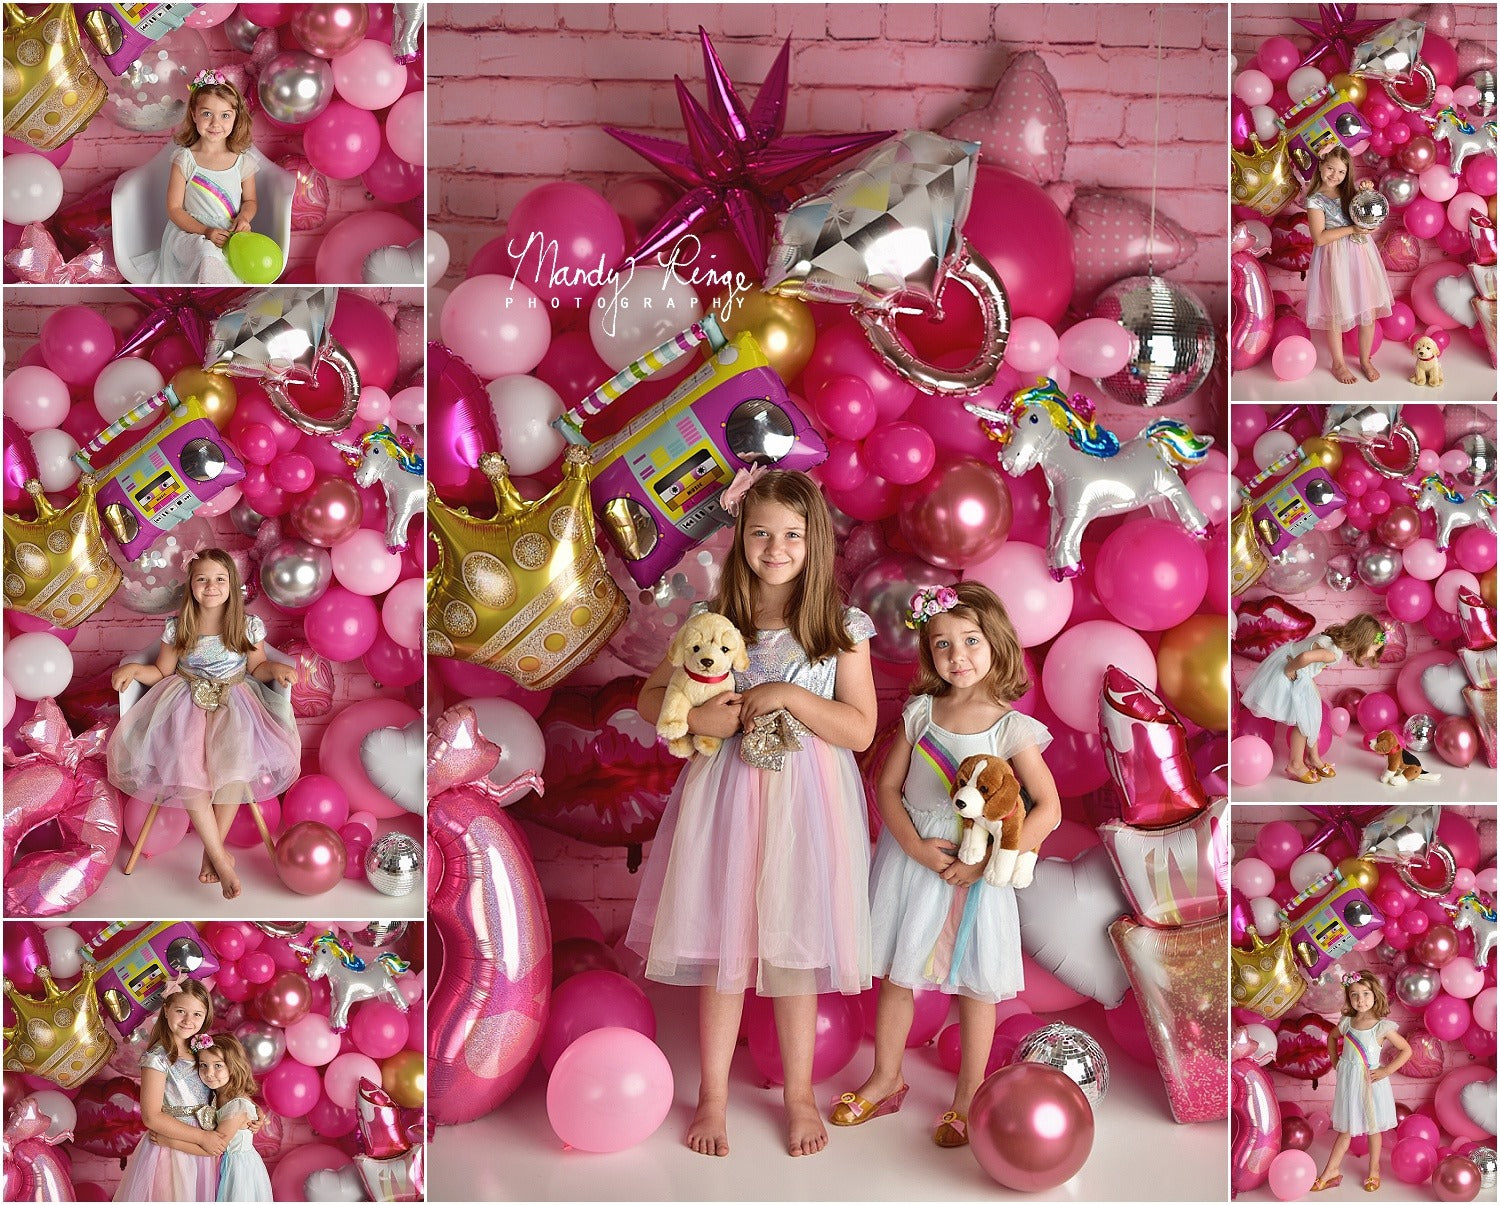 Kate 7x5ft Cake Smash Backdrop Doll Fantasy Birthday Party Girly Doll Designed by Mandy Ringe Photography (only ship to Canada)